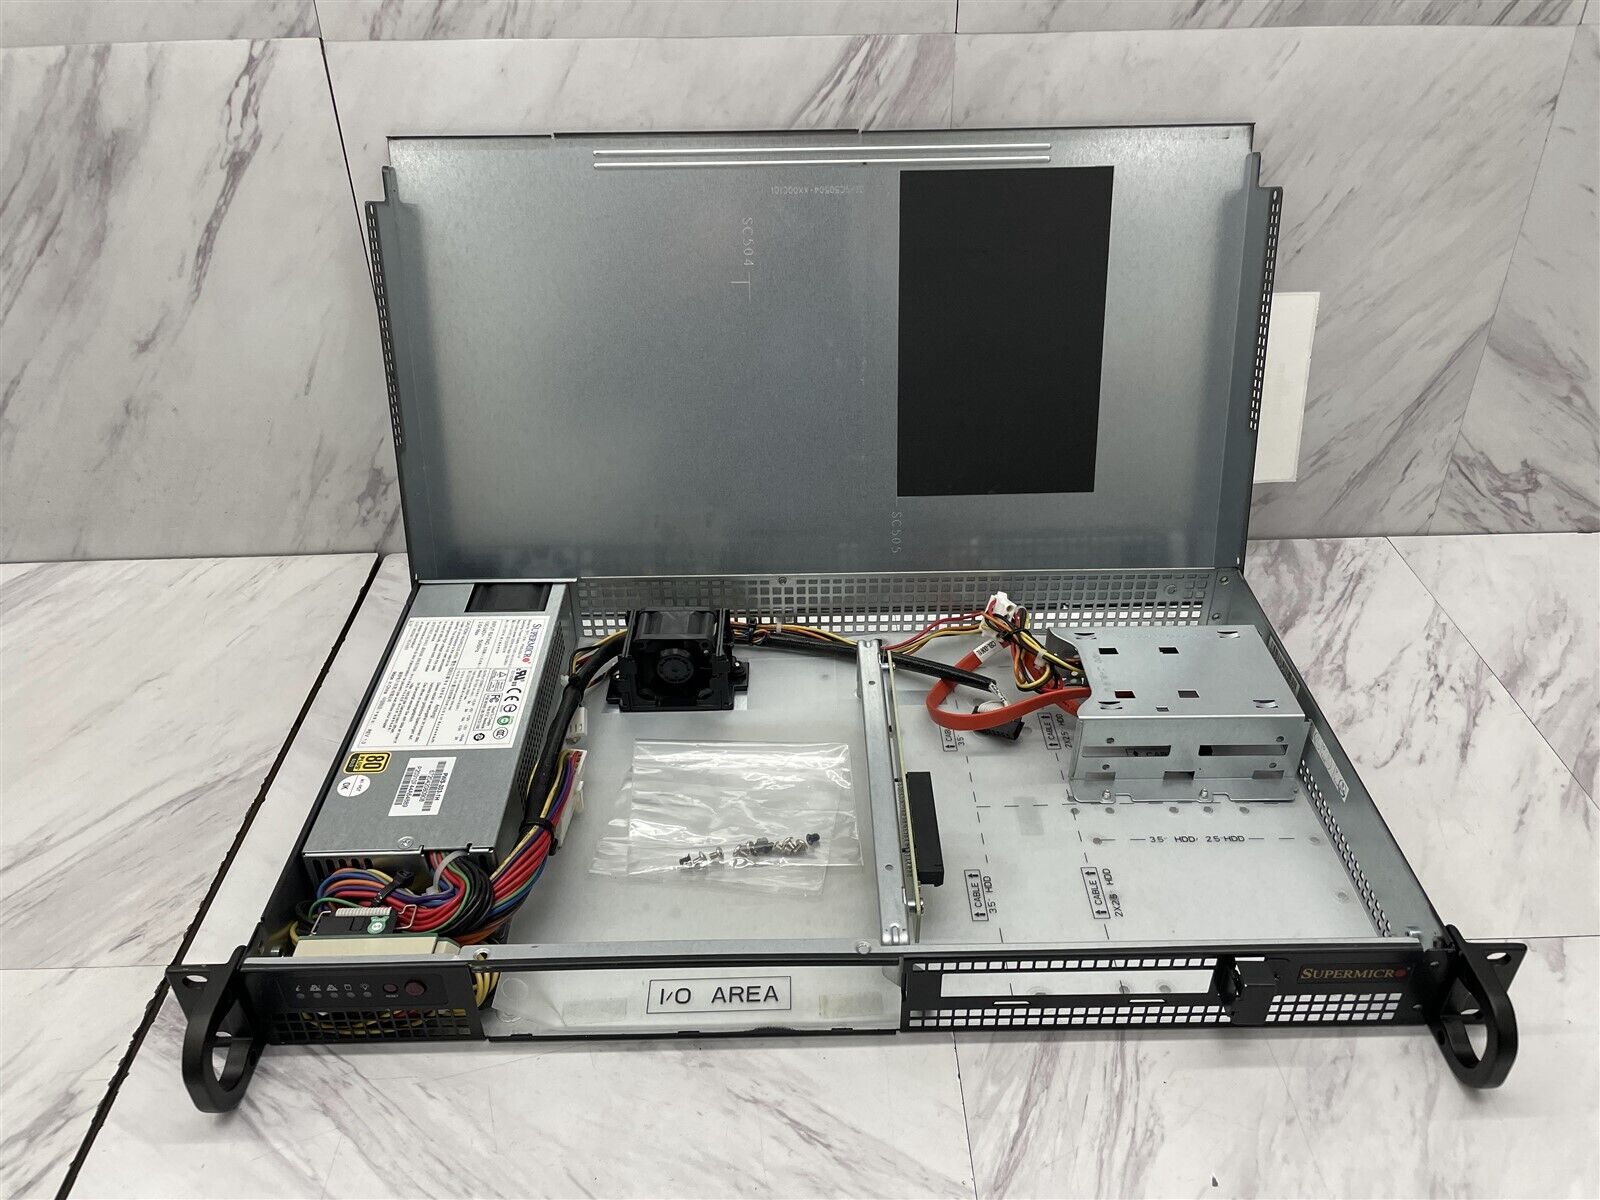 Supermicro SuperChassis 1U 505-2 Sever Chassis w/ Power Supply Fan Screws Ears